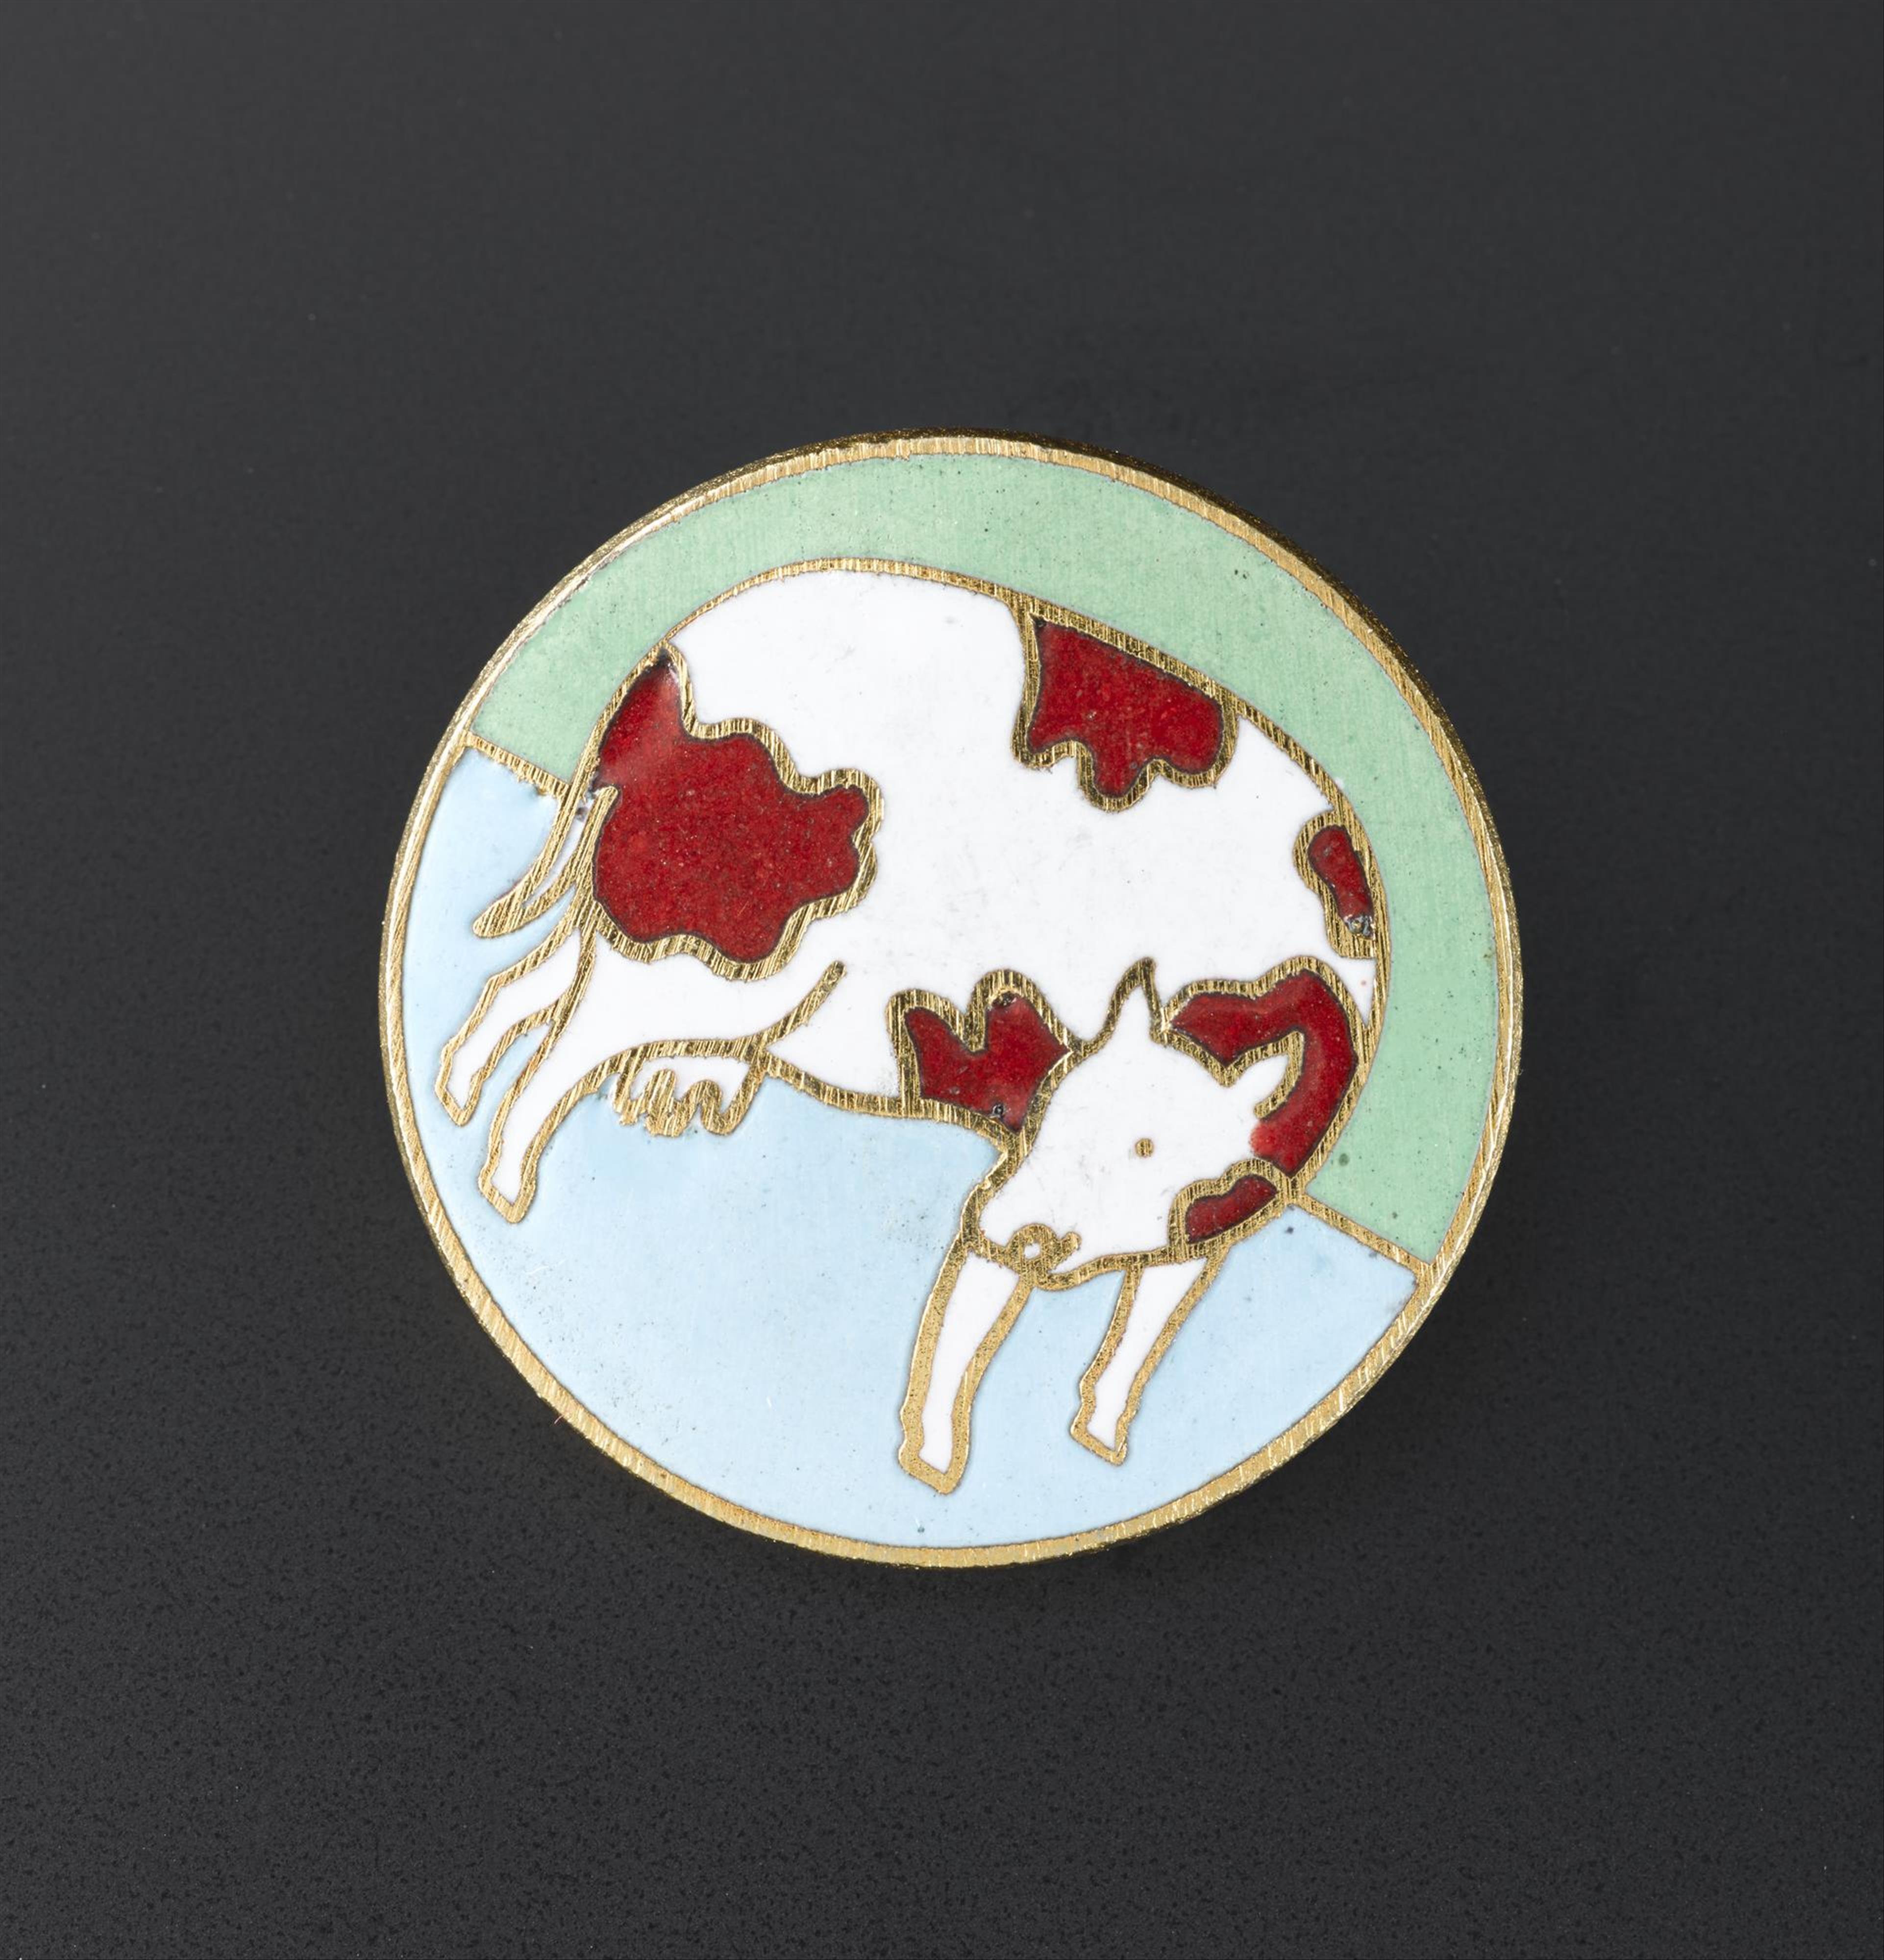 Button featuring a cow motif in enamel, possibly on silver gilt: British, by Marks of Distinction for Jean Muir Ltd, c.1972. 